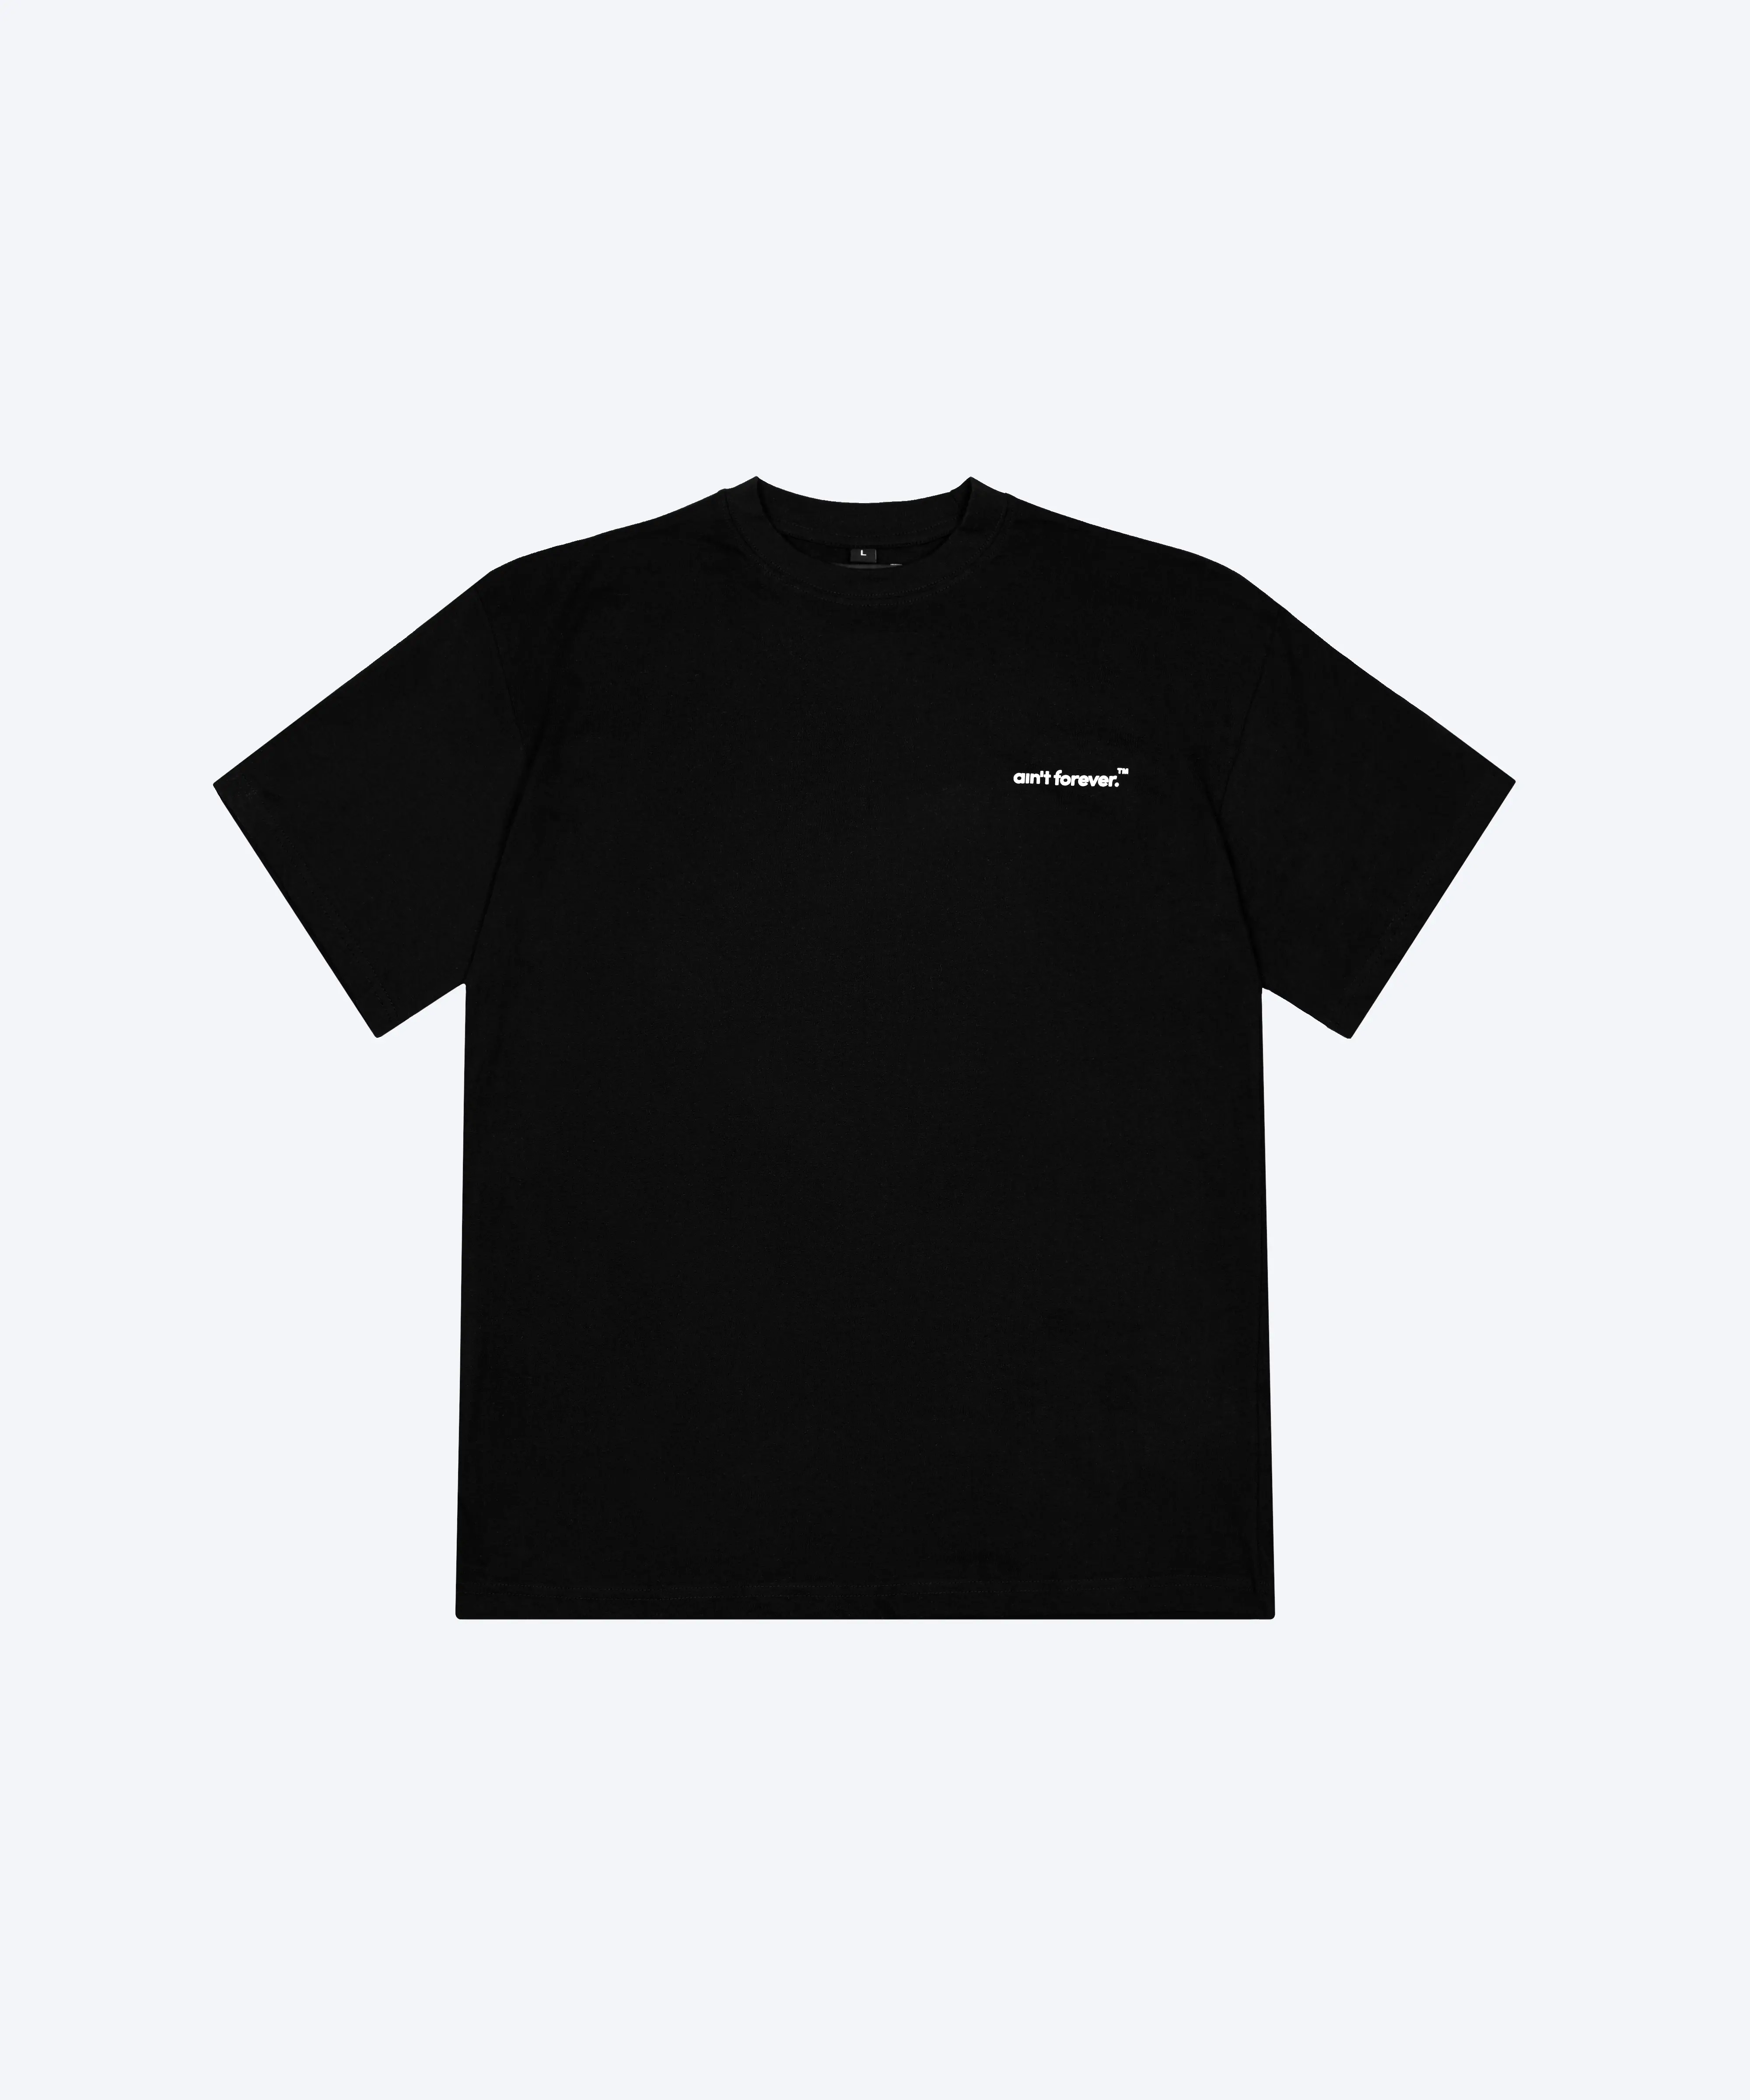 THE OVERSIZED BOARDING PASS T-SHIRT (BLACK / PINK)